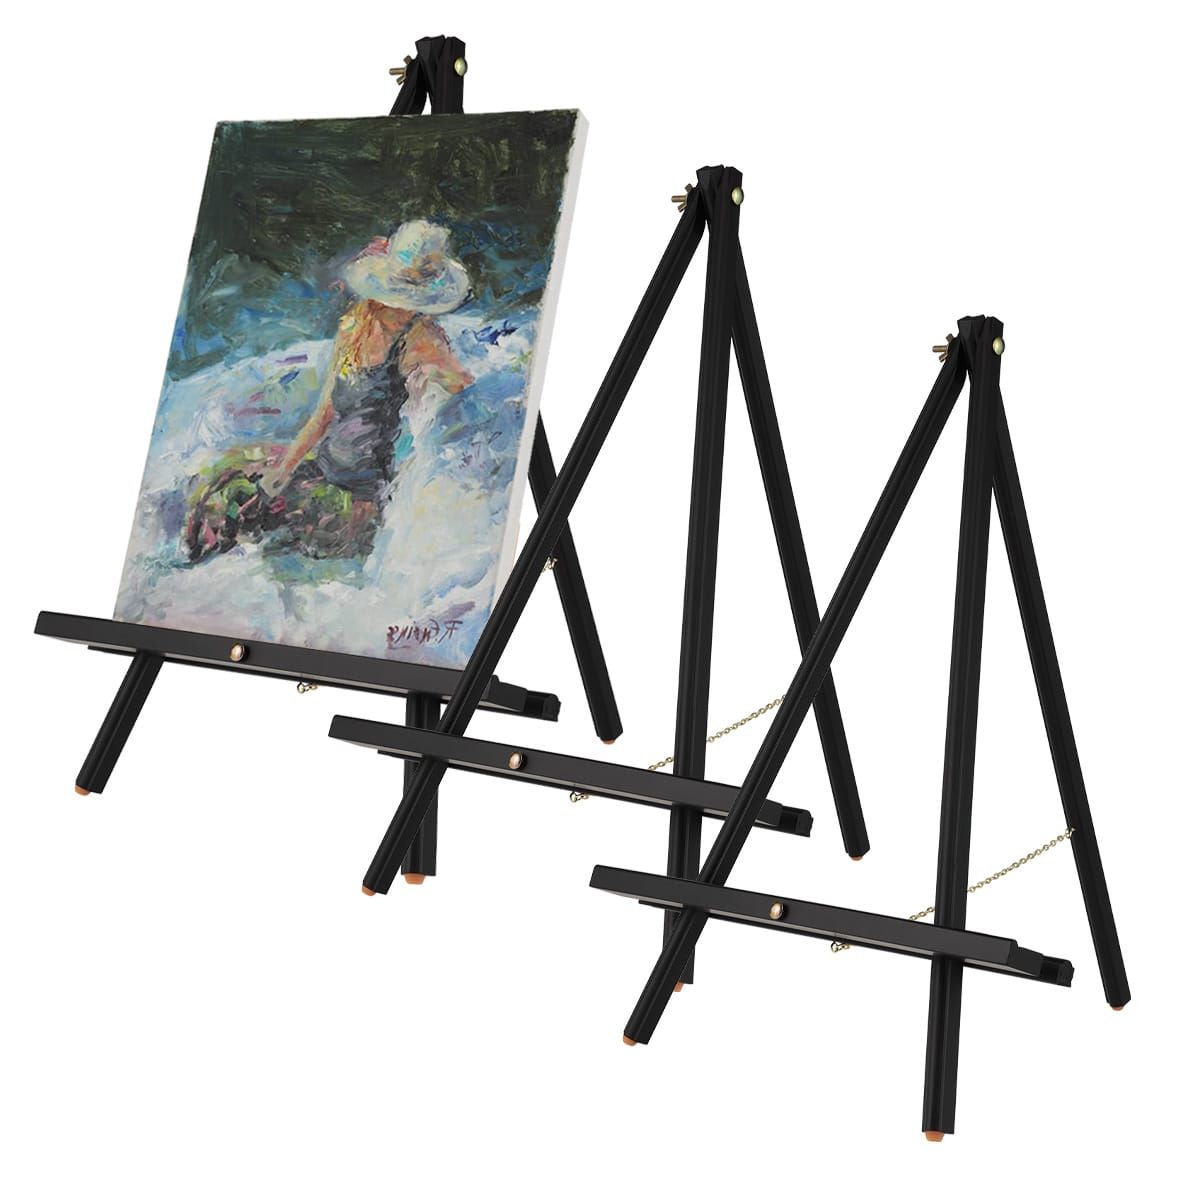 30 Foldble Table Tripod Easel Stand Wood - Easel Stands & Drafting Tables - Art Supplies & Painting